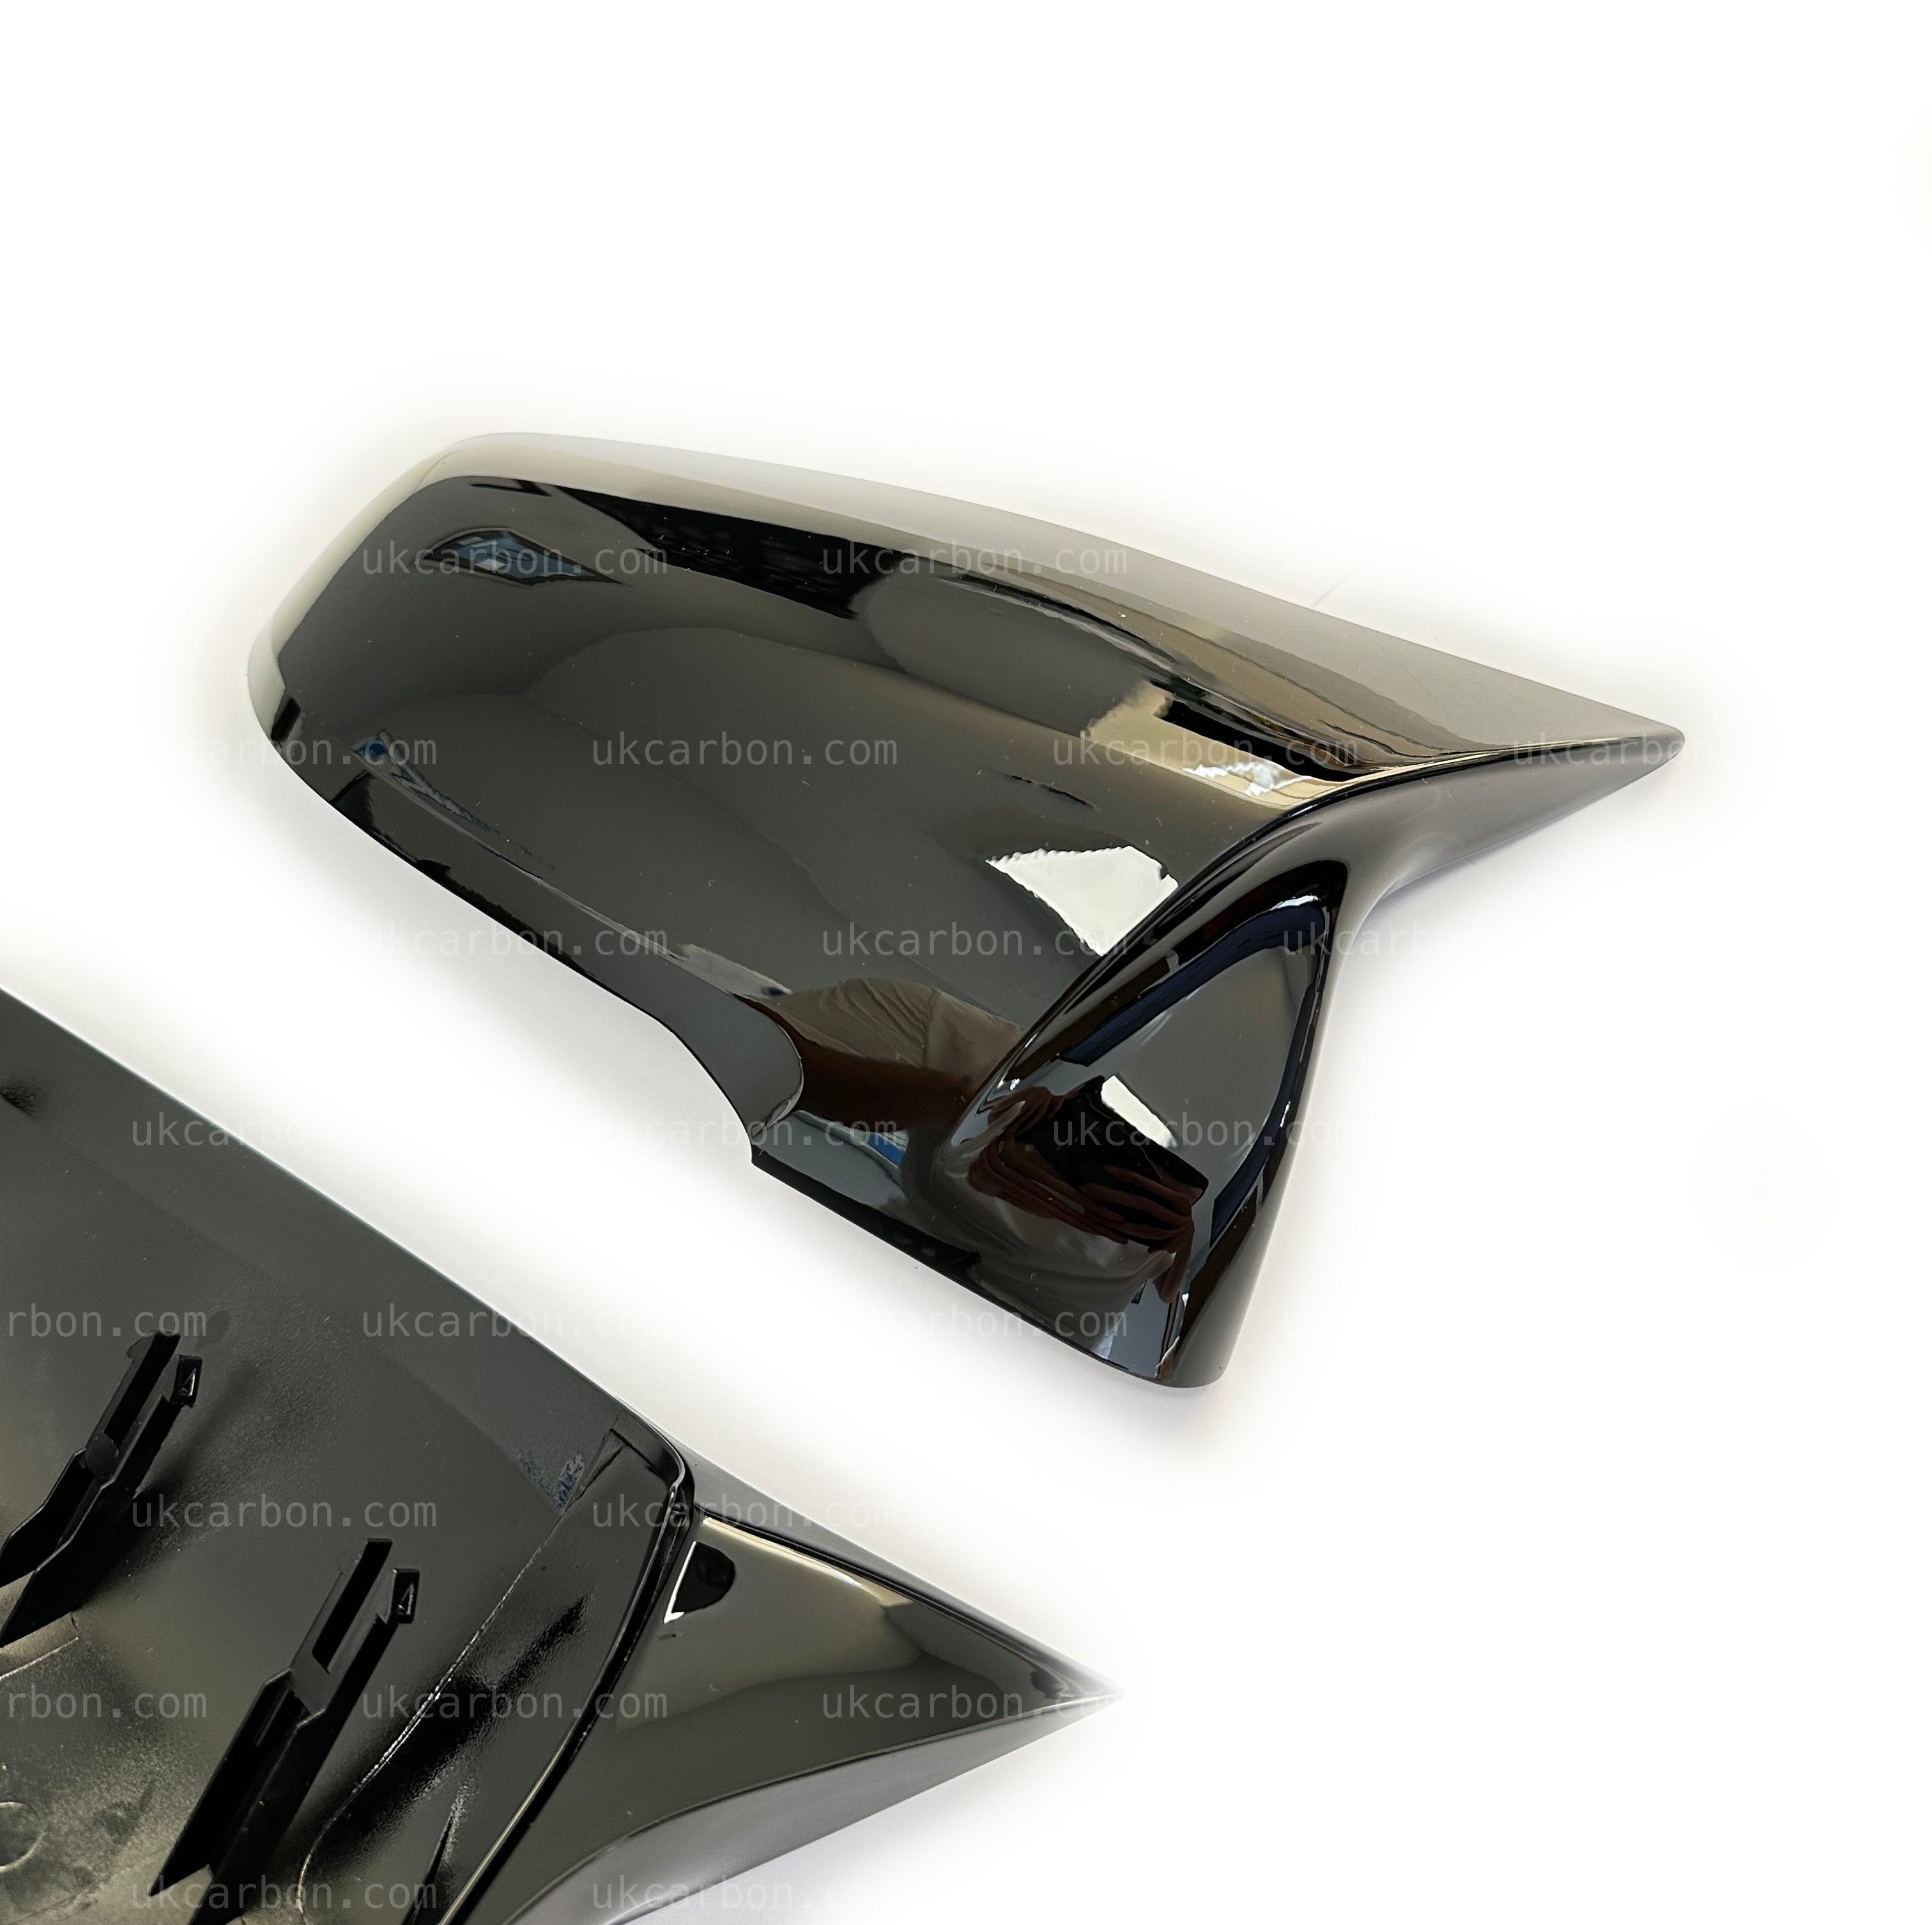 BMW 1 Series Gloss Black M Wing Mirror Cover M Performance F40 by UKCarbon